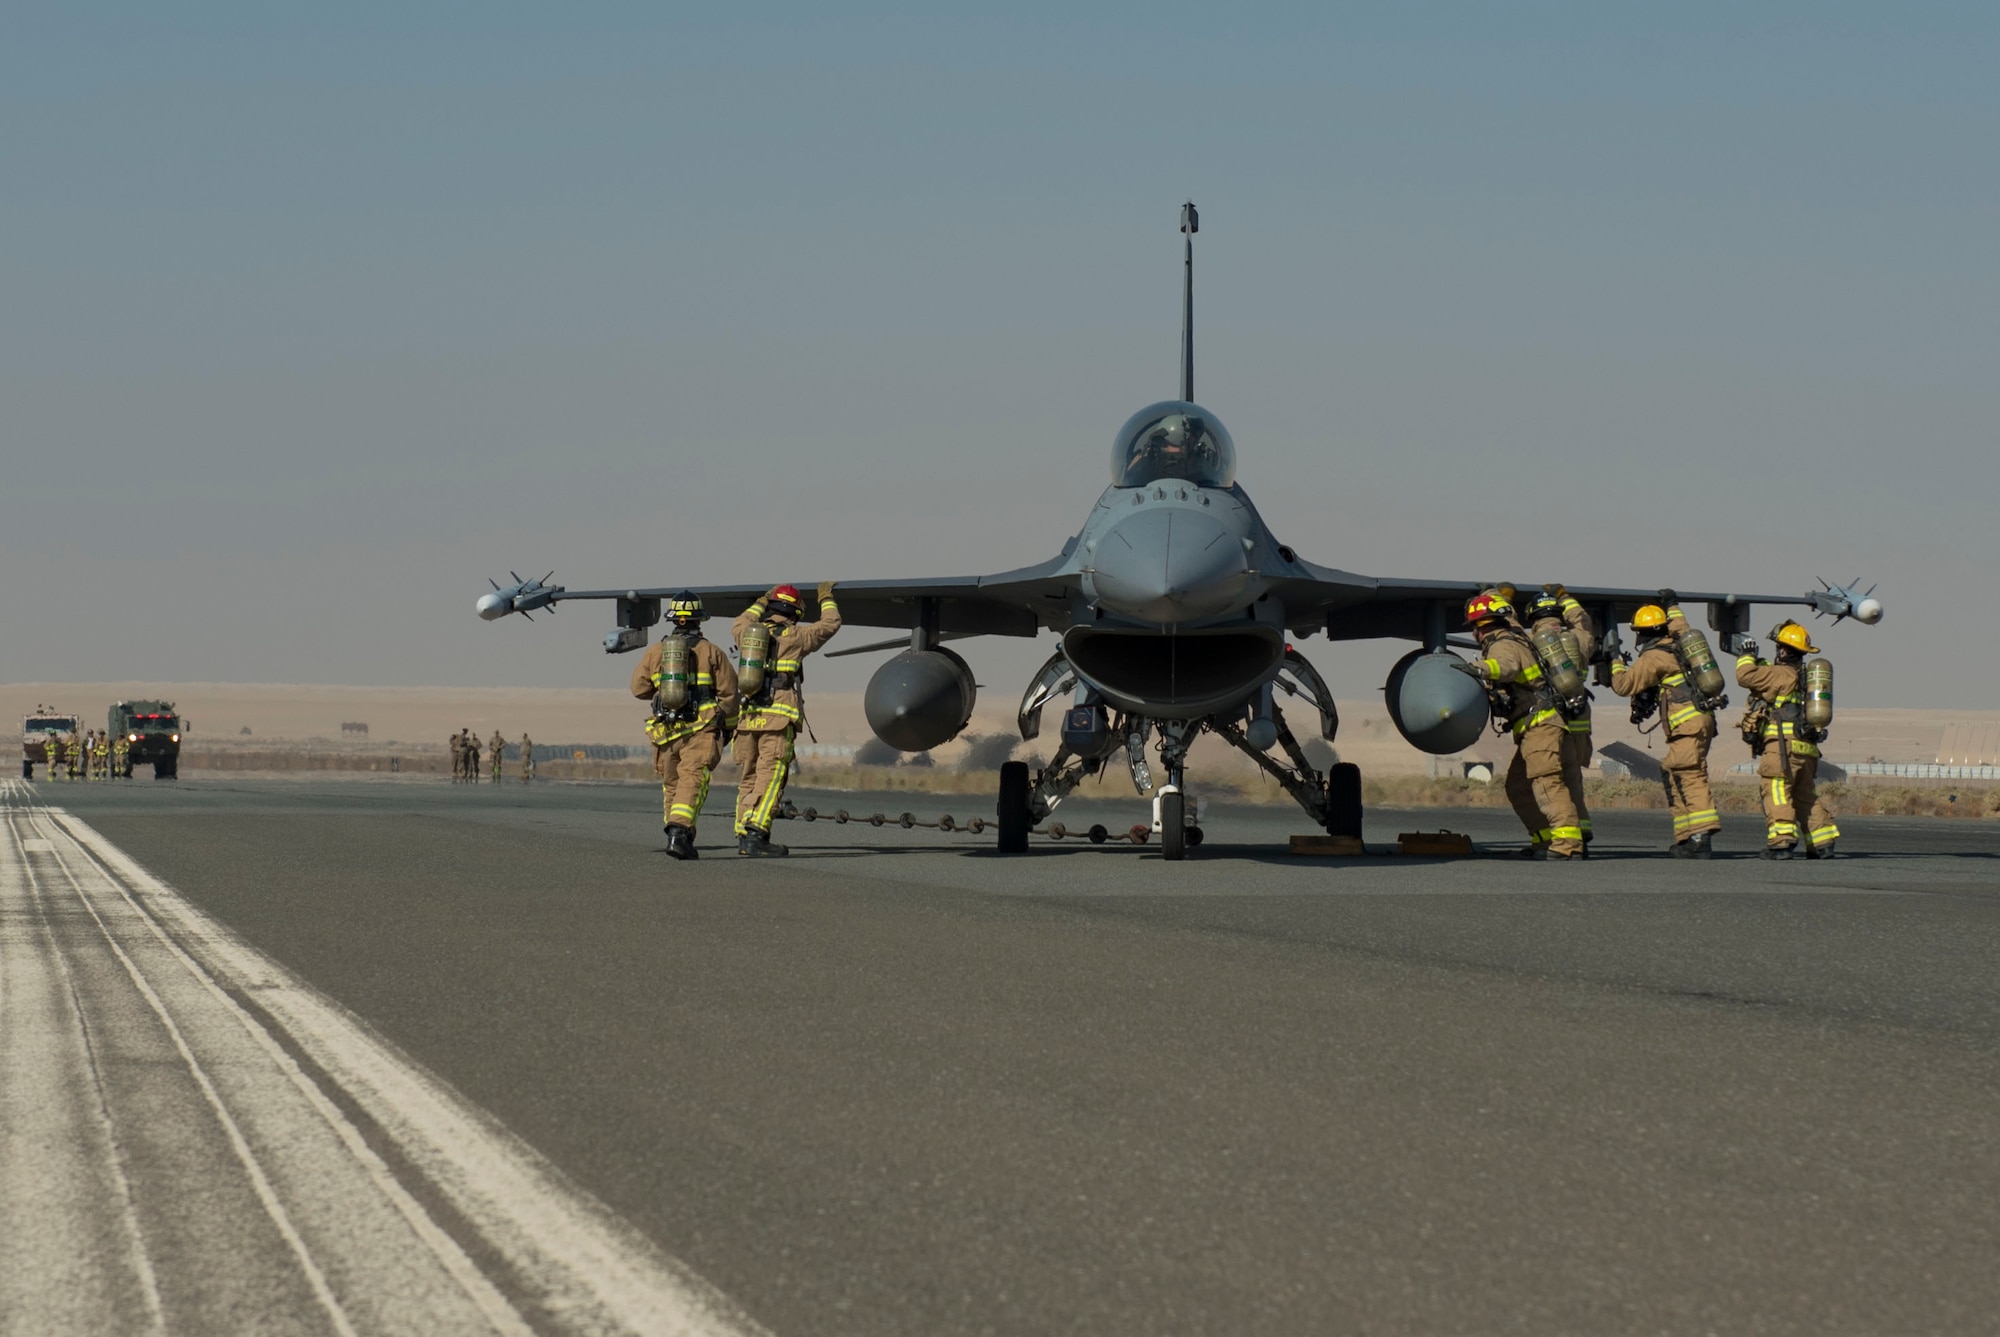 U.S. Air Force firefighters assigned to the 386th Expeditionary Civil Engineer Squadron push a 480th Expeditionary Fighter Squadron F-16 Fighting Falcon during a Mobile Aircraft Arresting System certification at Ali Al Salem Air Base, Kuwait, Nov. 22, 2020.